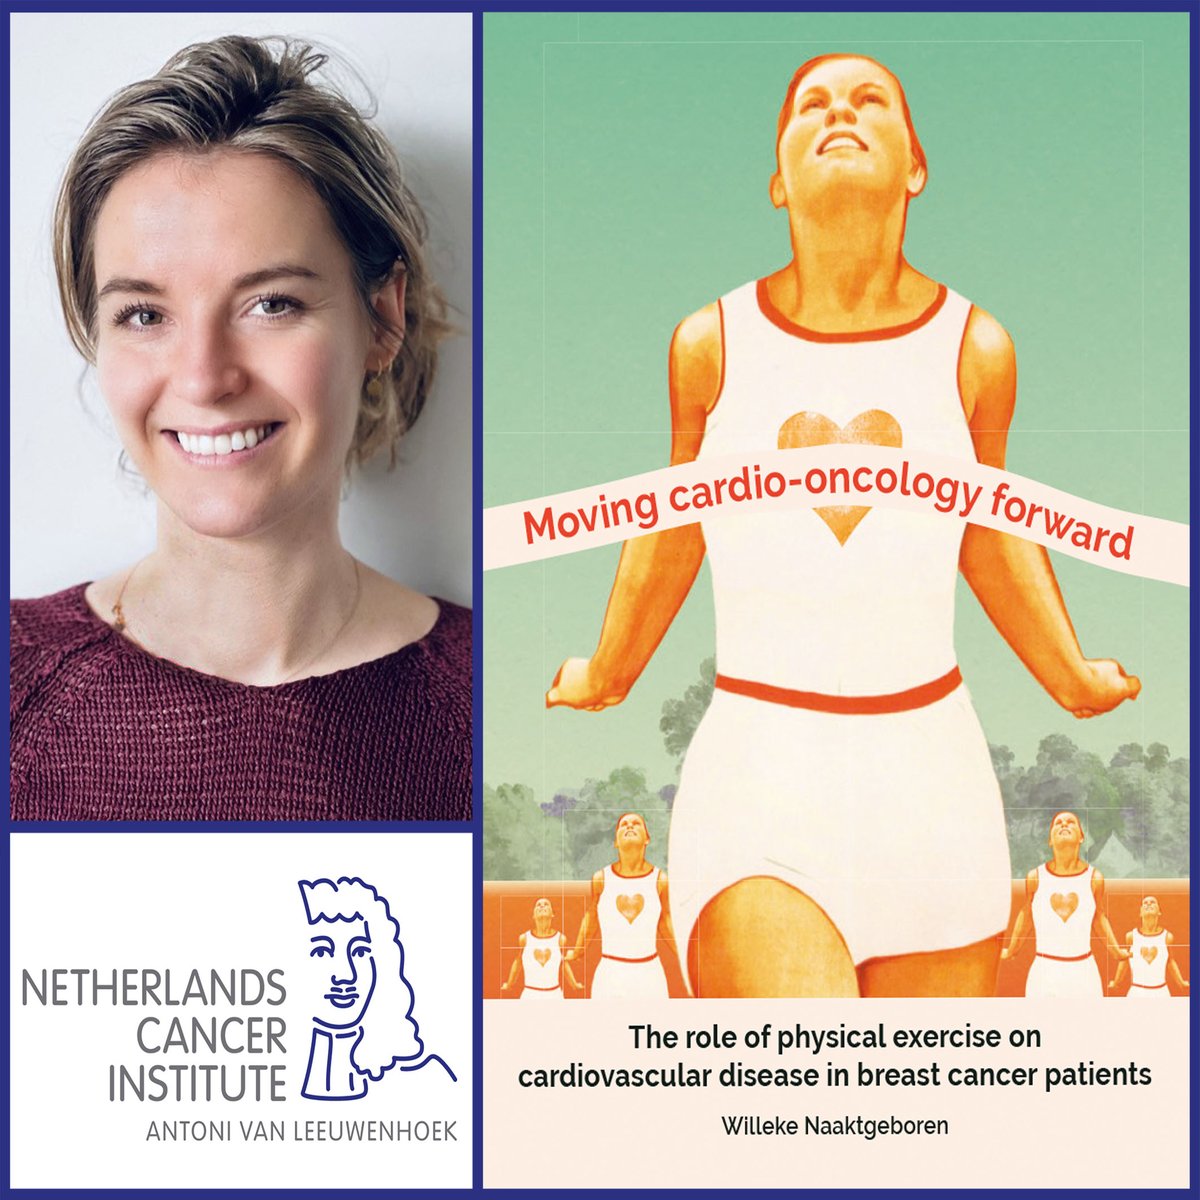 Breast cancer patients who engaged in intensive physical activity during their treatment may experience less cardiovascular damage, PhD candidate Willeke Naaktgeboren found. She successfully defended her thesis on October 24. @hetAVL @uniutrecht @spaarnegasthuis